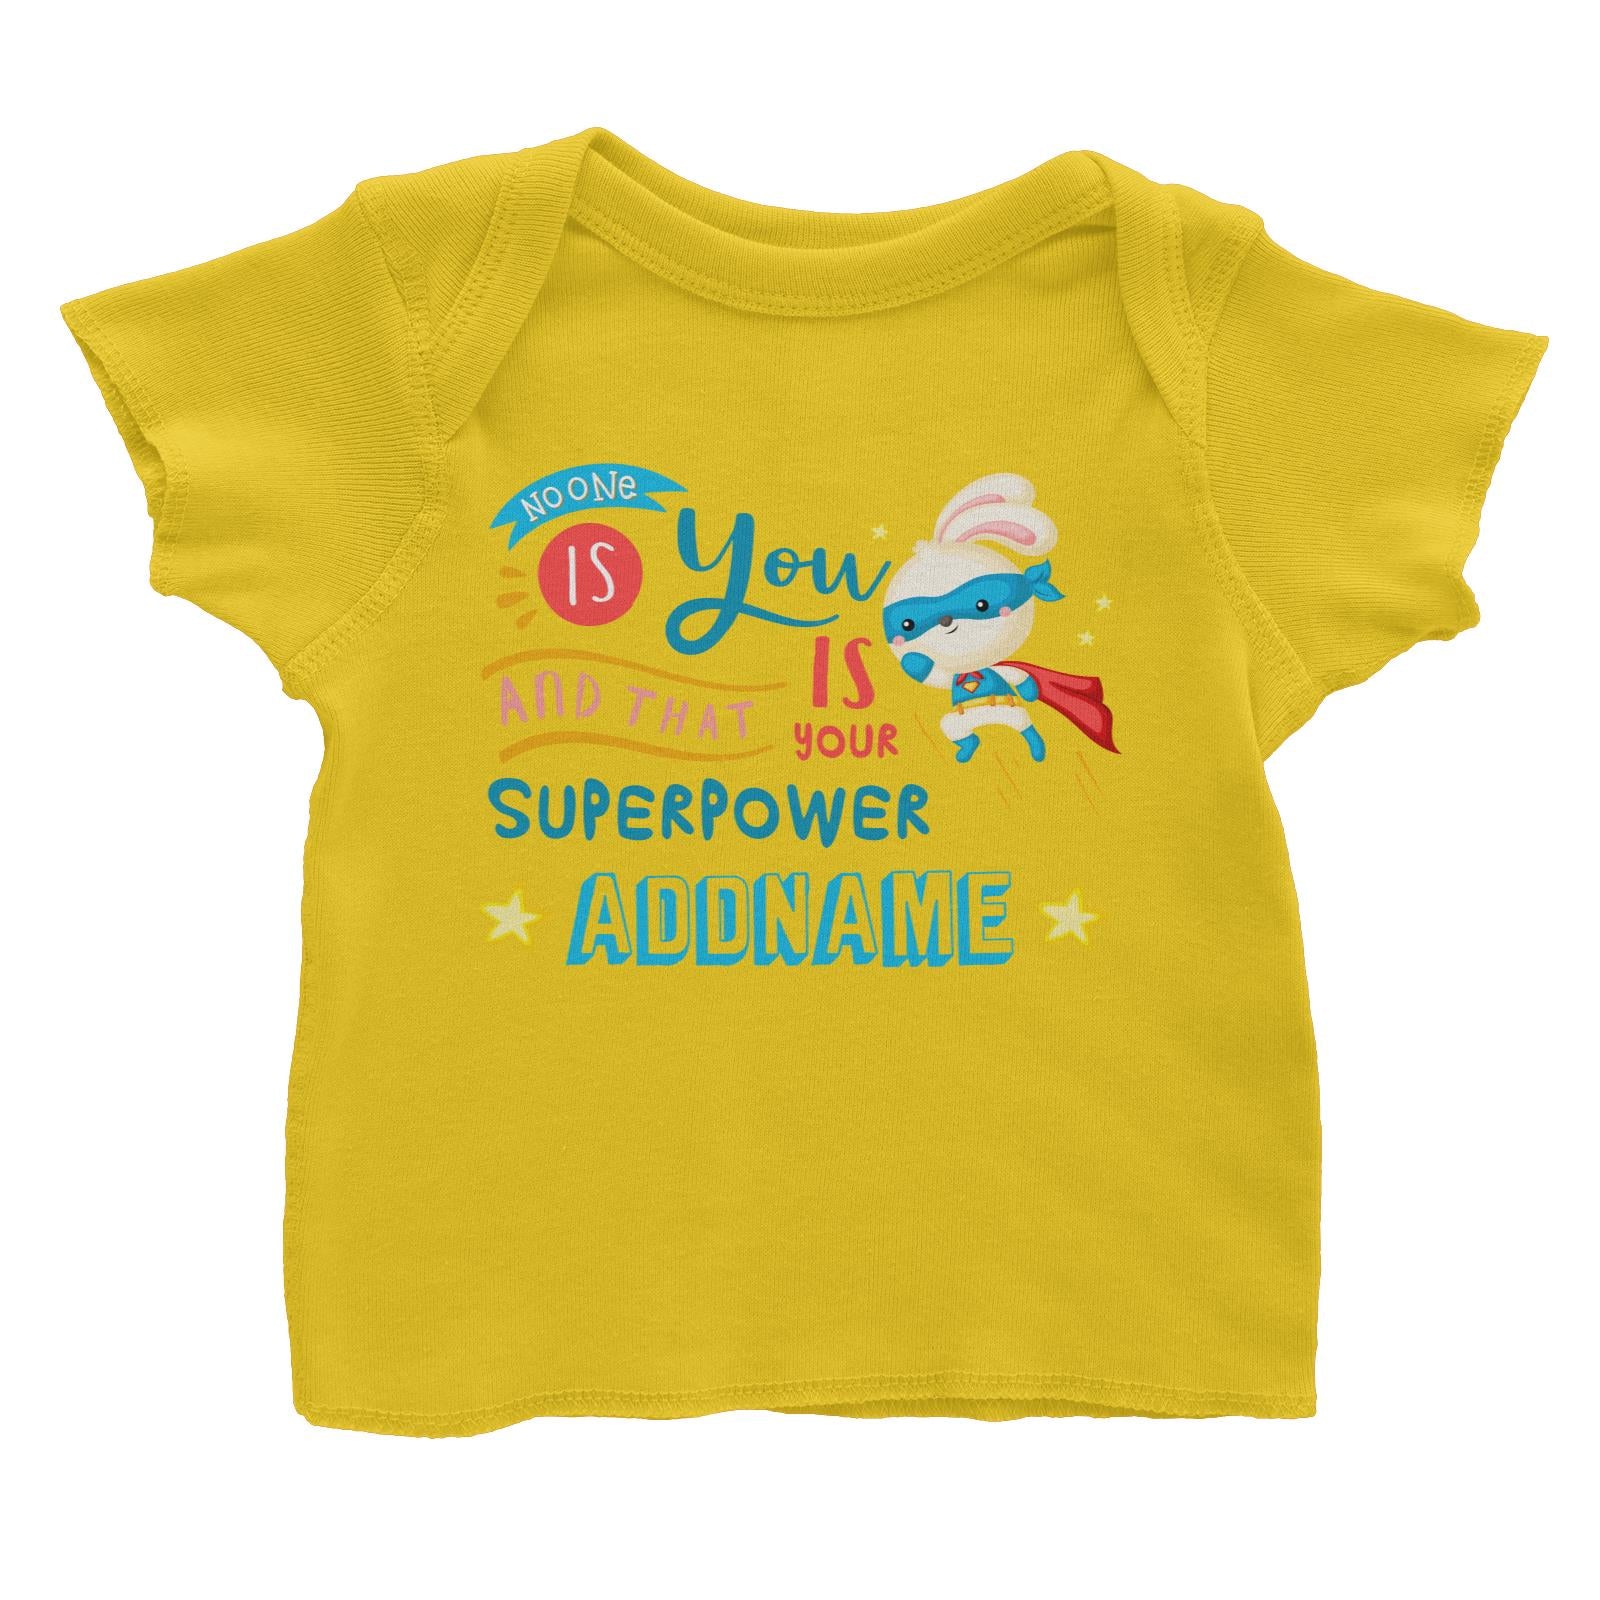 Children's Day Gift Series No One Is You And That Is Your Superpower Blue Addname Baby T-Shirt